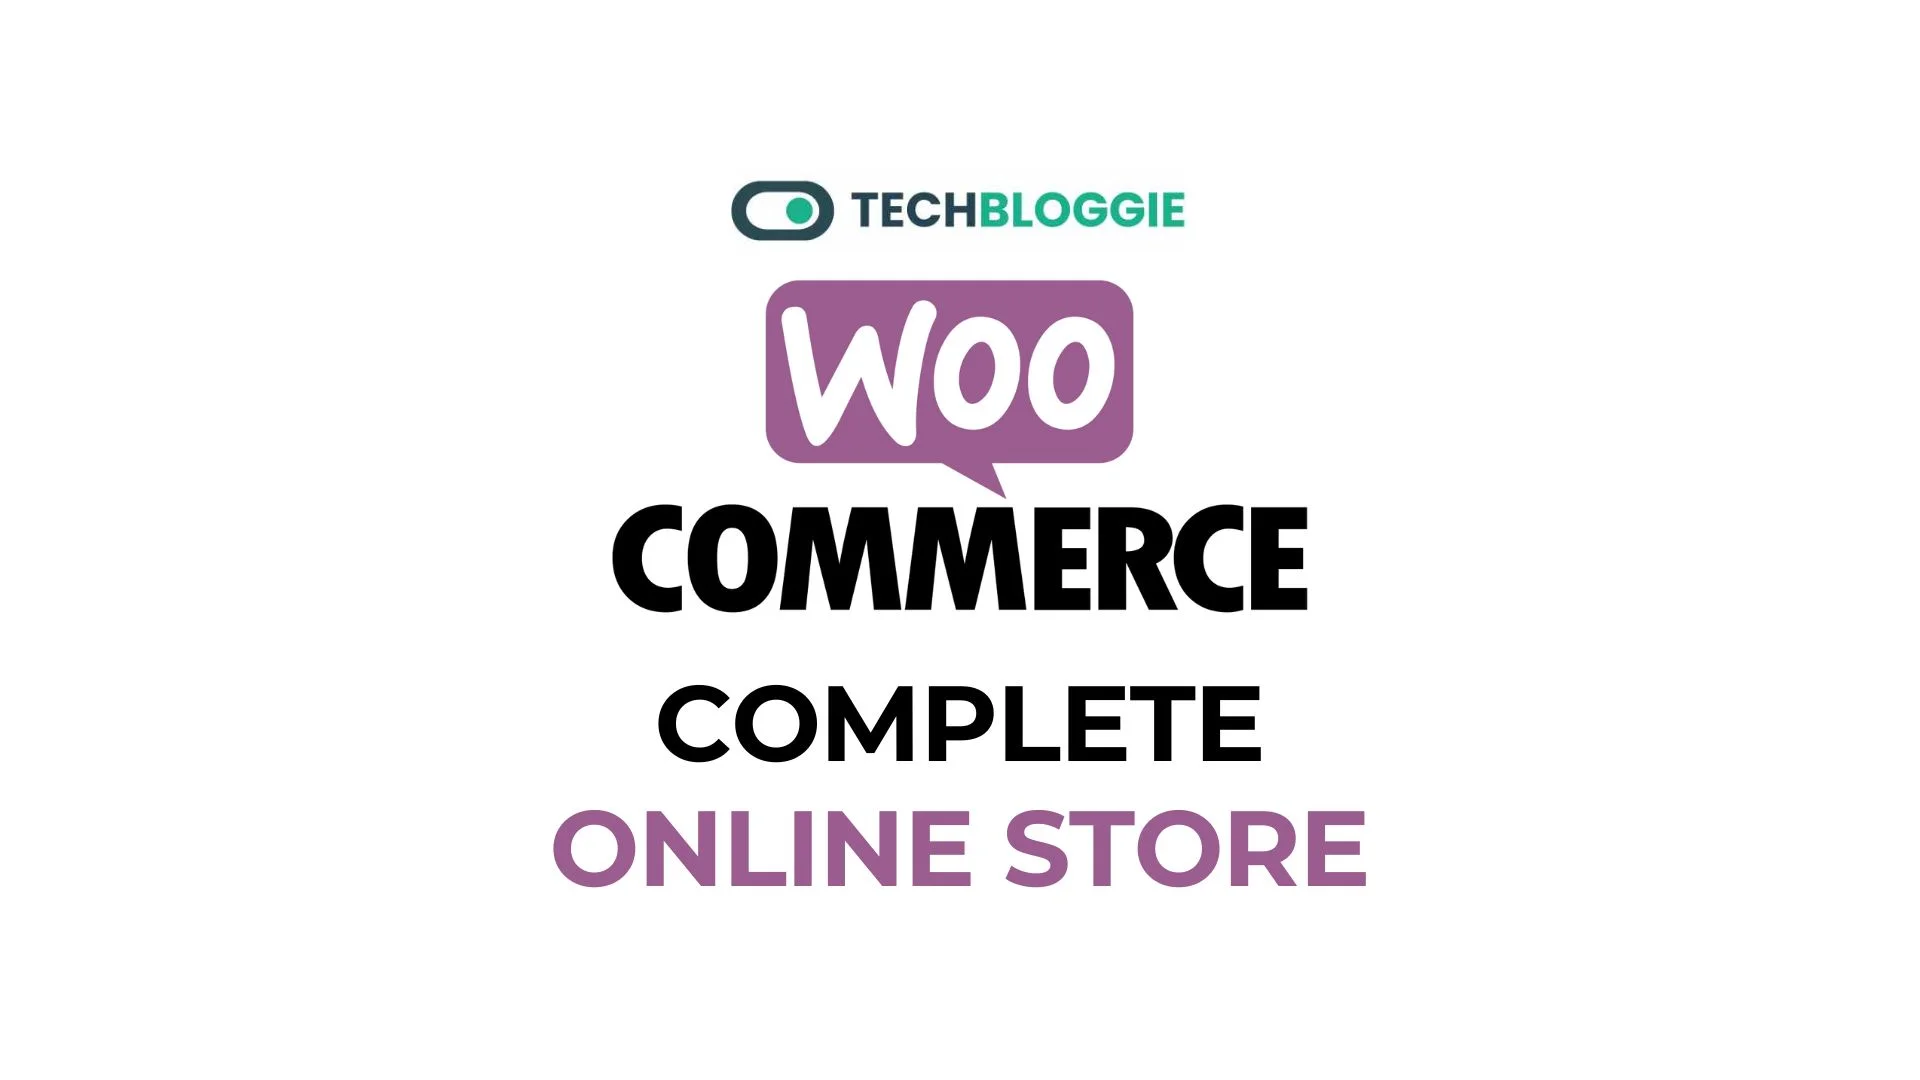 How to create an Online Store using WooCommerce in WordPress